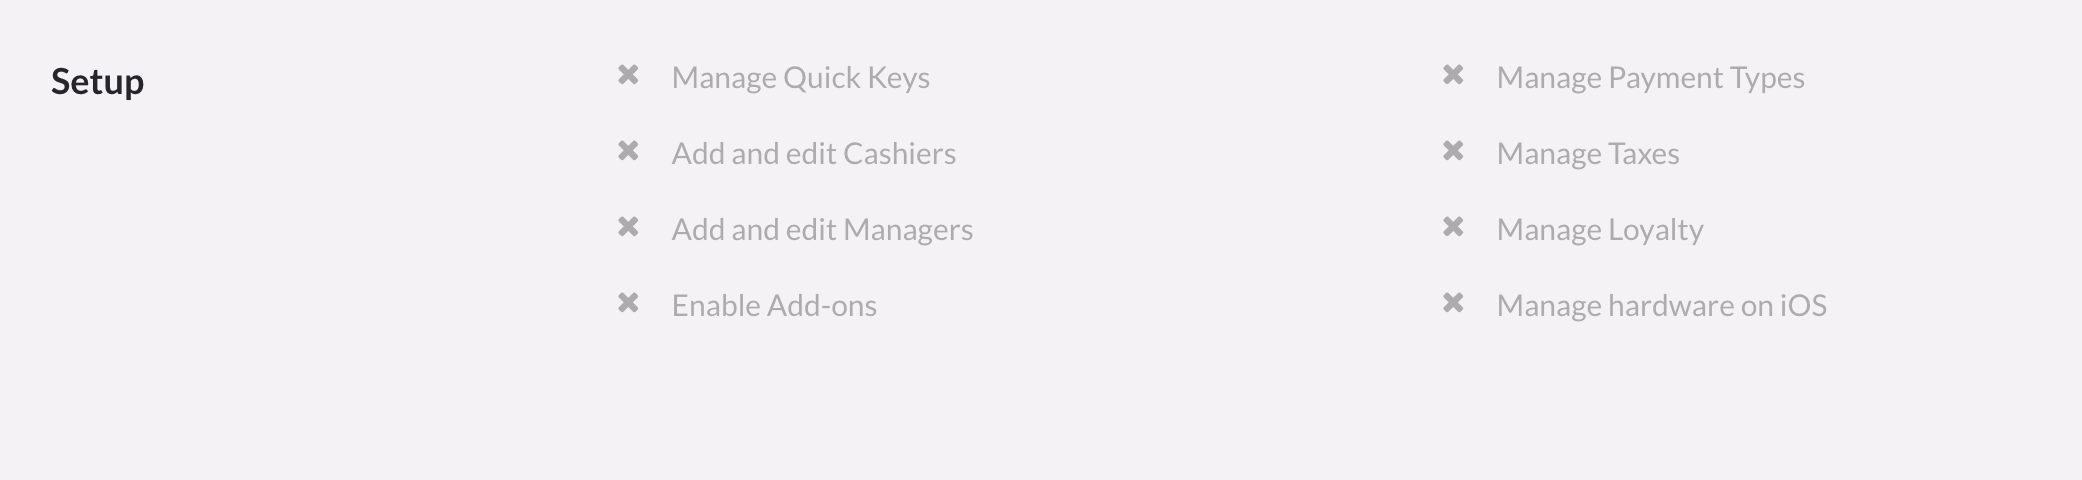 The Setup section showing the locked options for Cashiers and Managers.